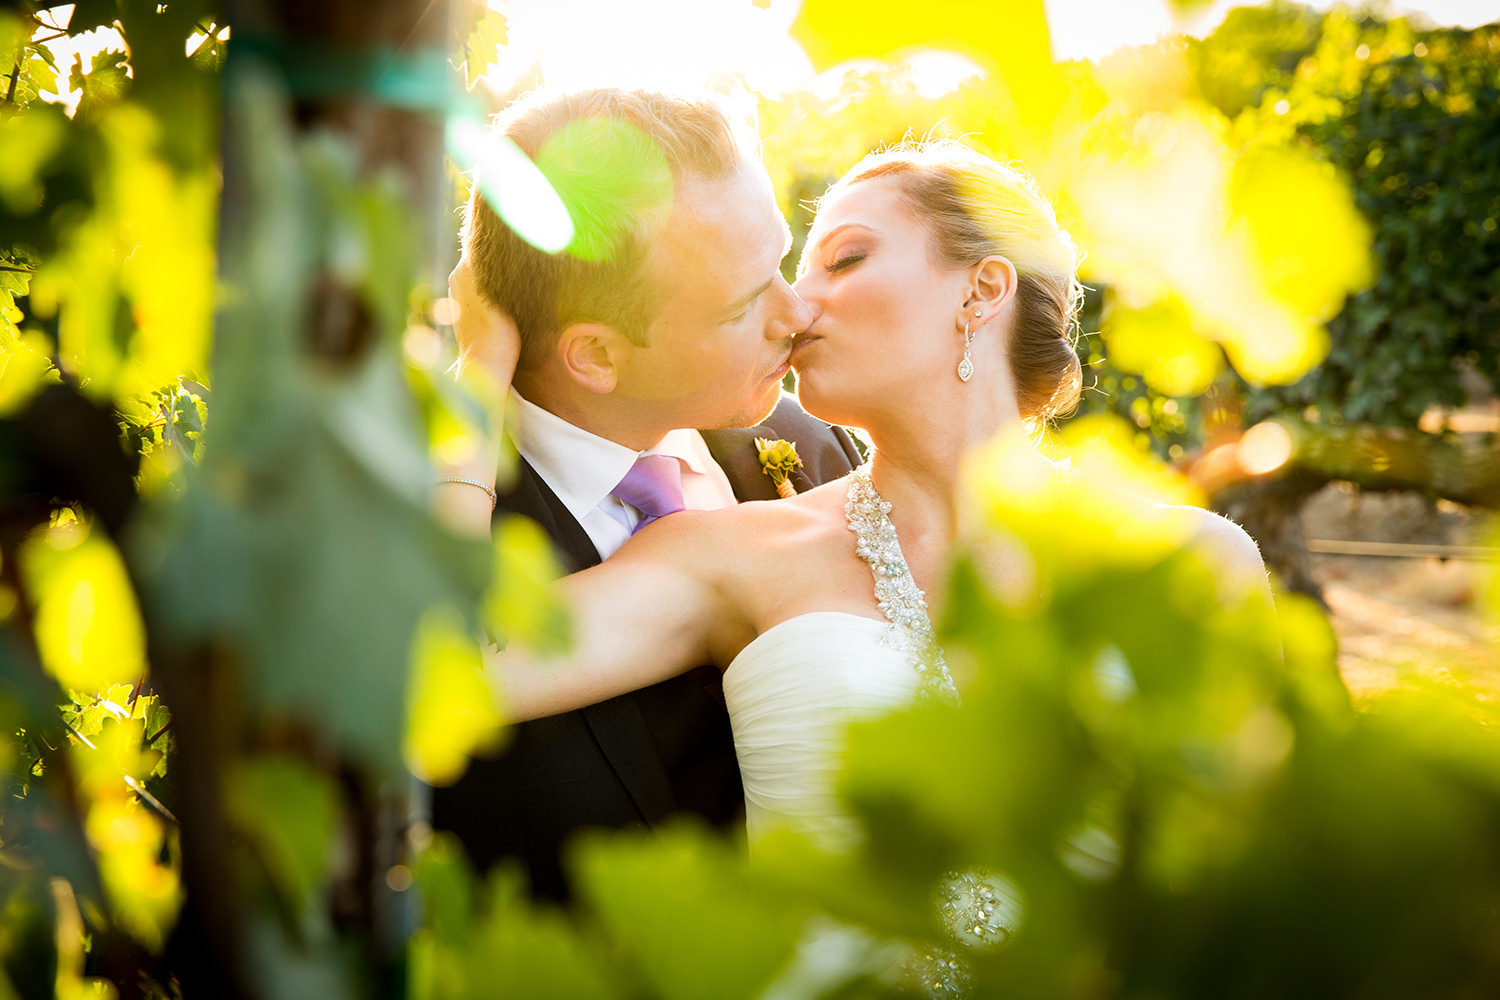 romantic moment with the bride and groom in the vineyard